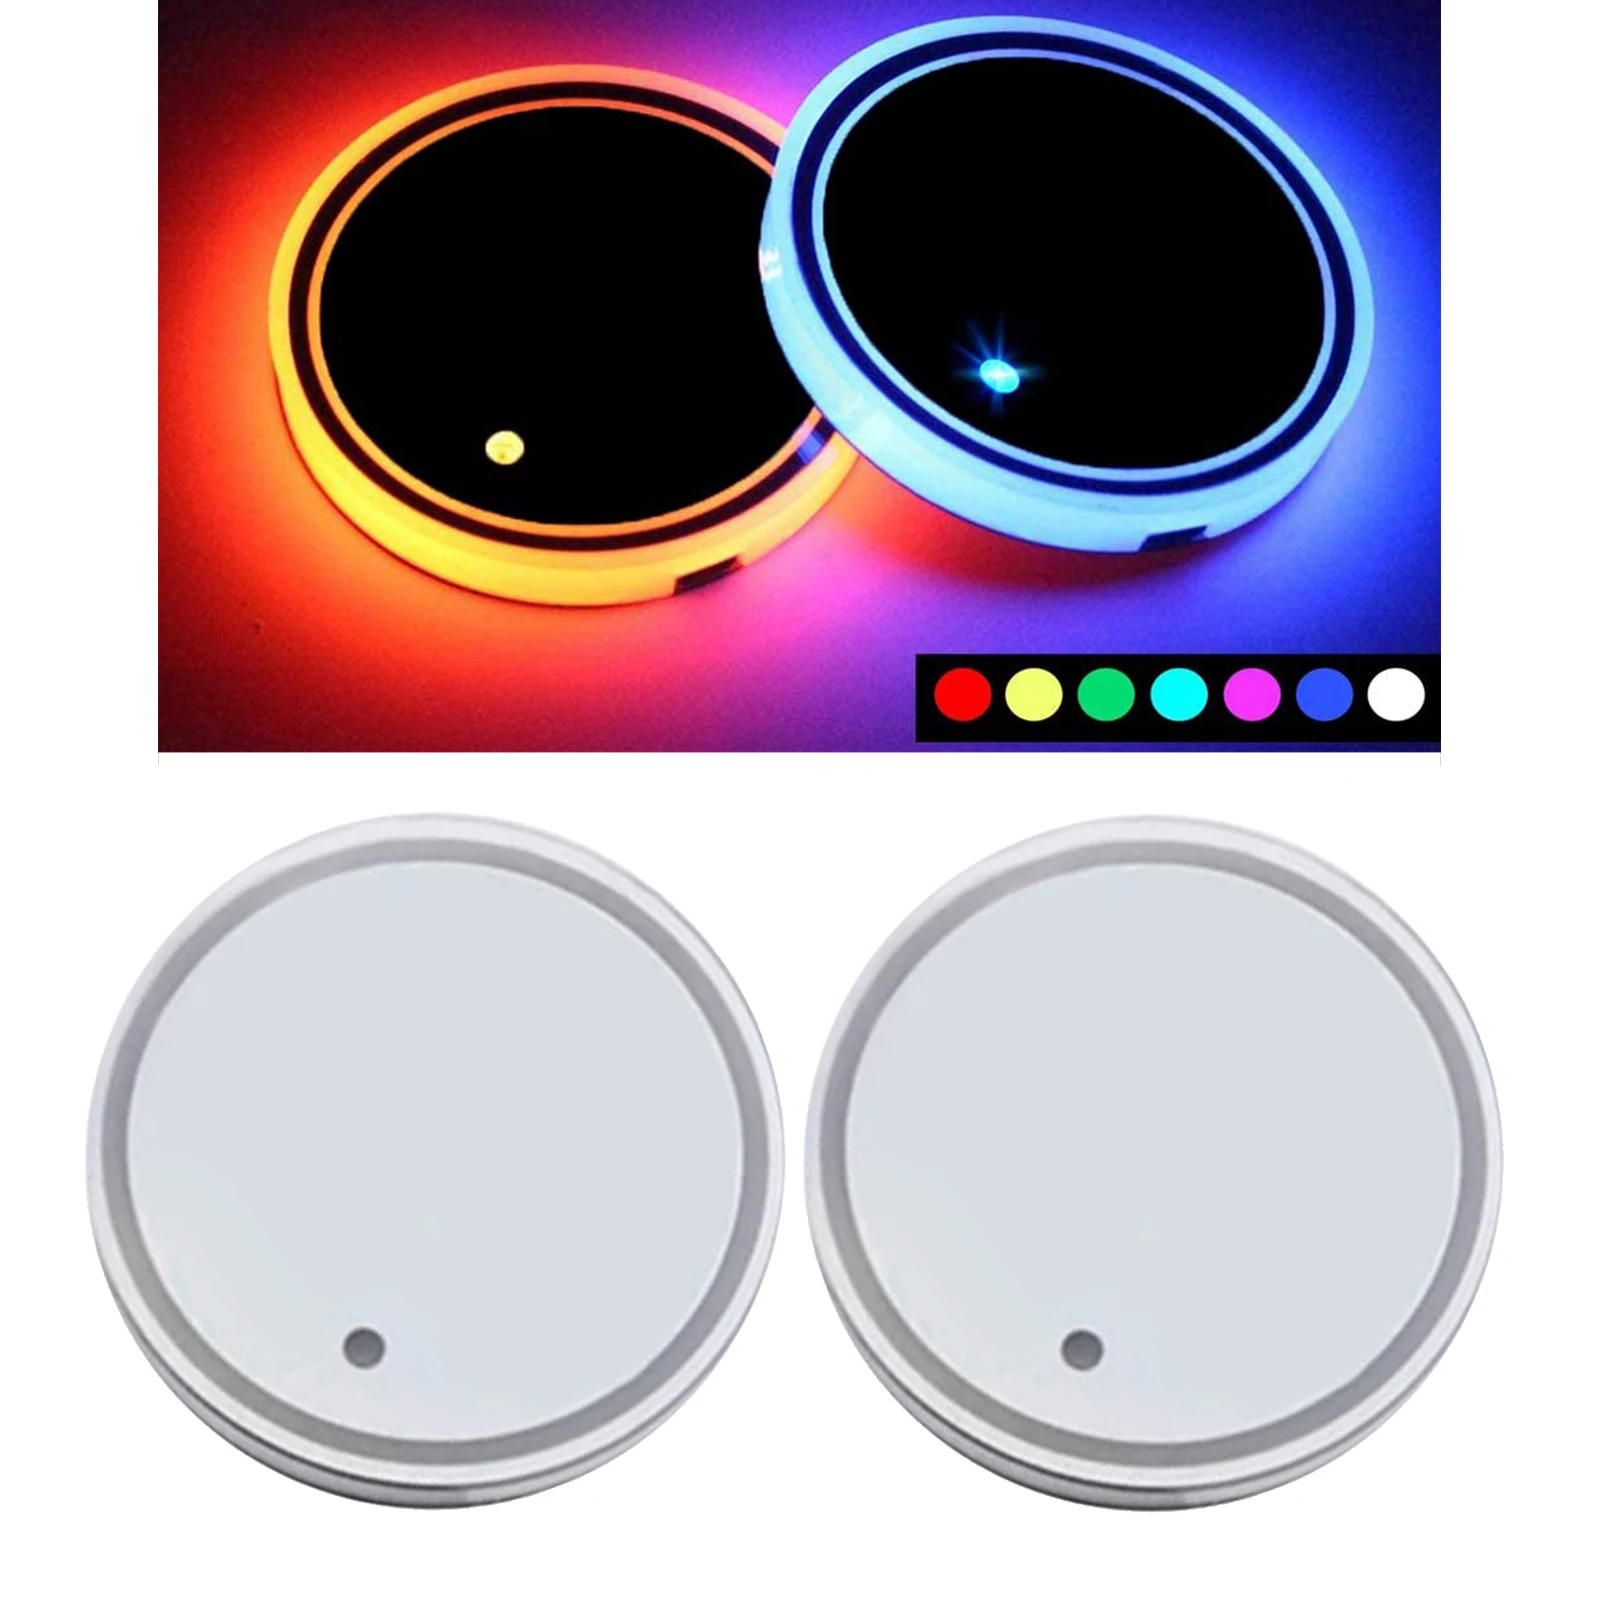 LED Cup Holder Lights, Coaster with 7-Colors USB Charging Charging Mat, Luminescent Cup Pad Interior Atmosphere Lamp